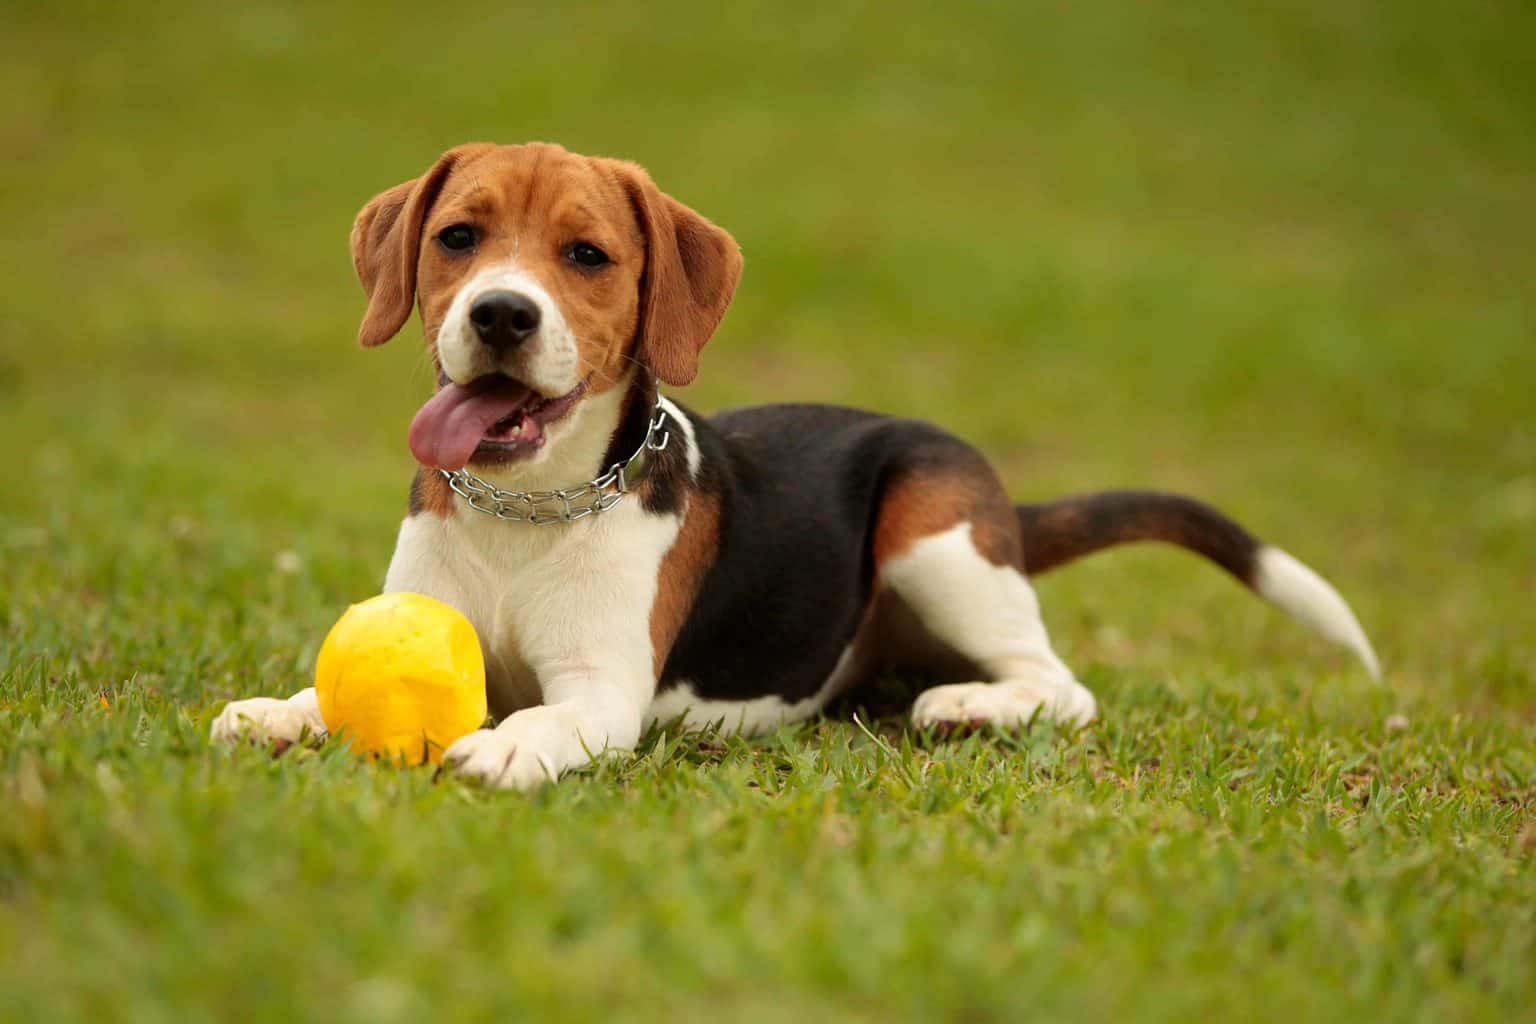 Beagle plays with toy in backyard. Playing fetch with a tennis ball or another favorite toy gives your dog a chance to run and burn off some excess energy.